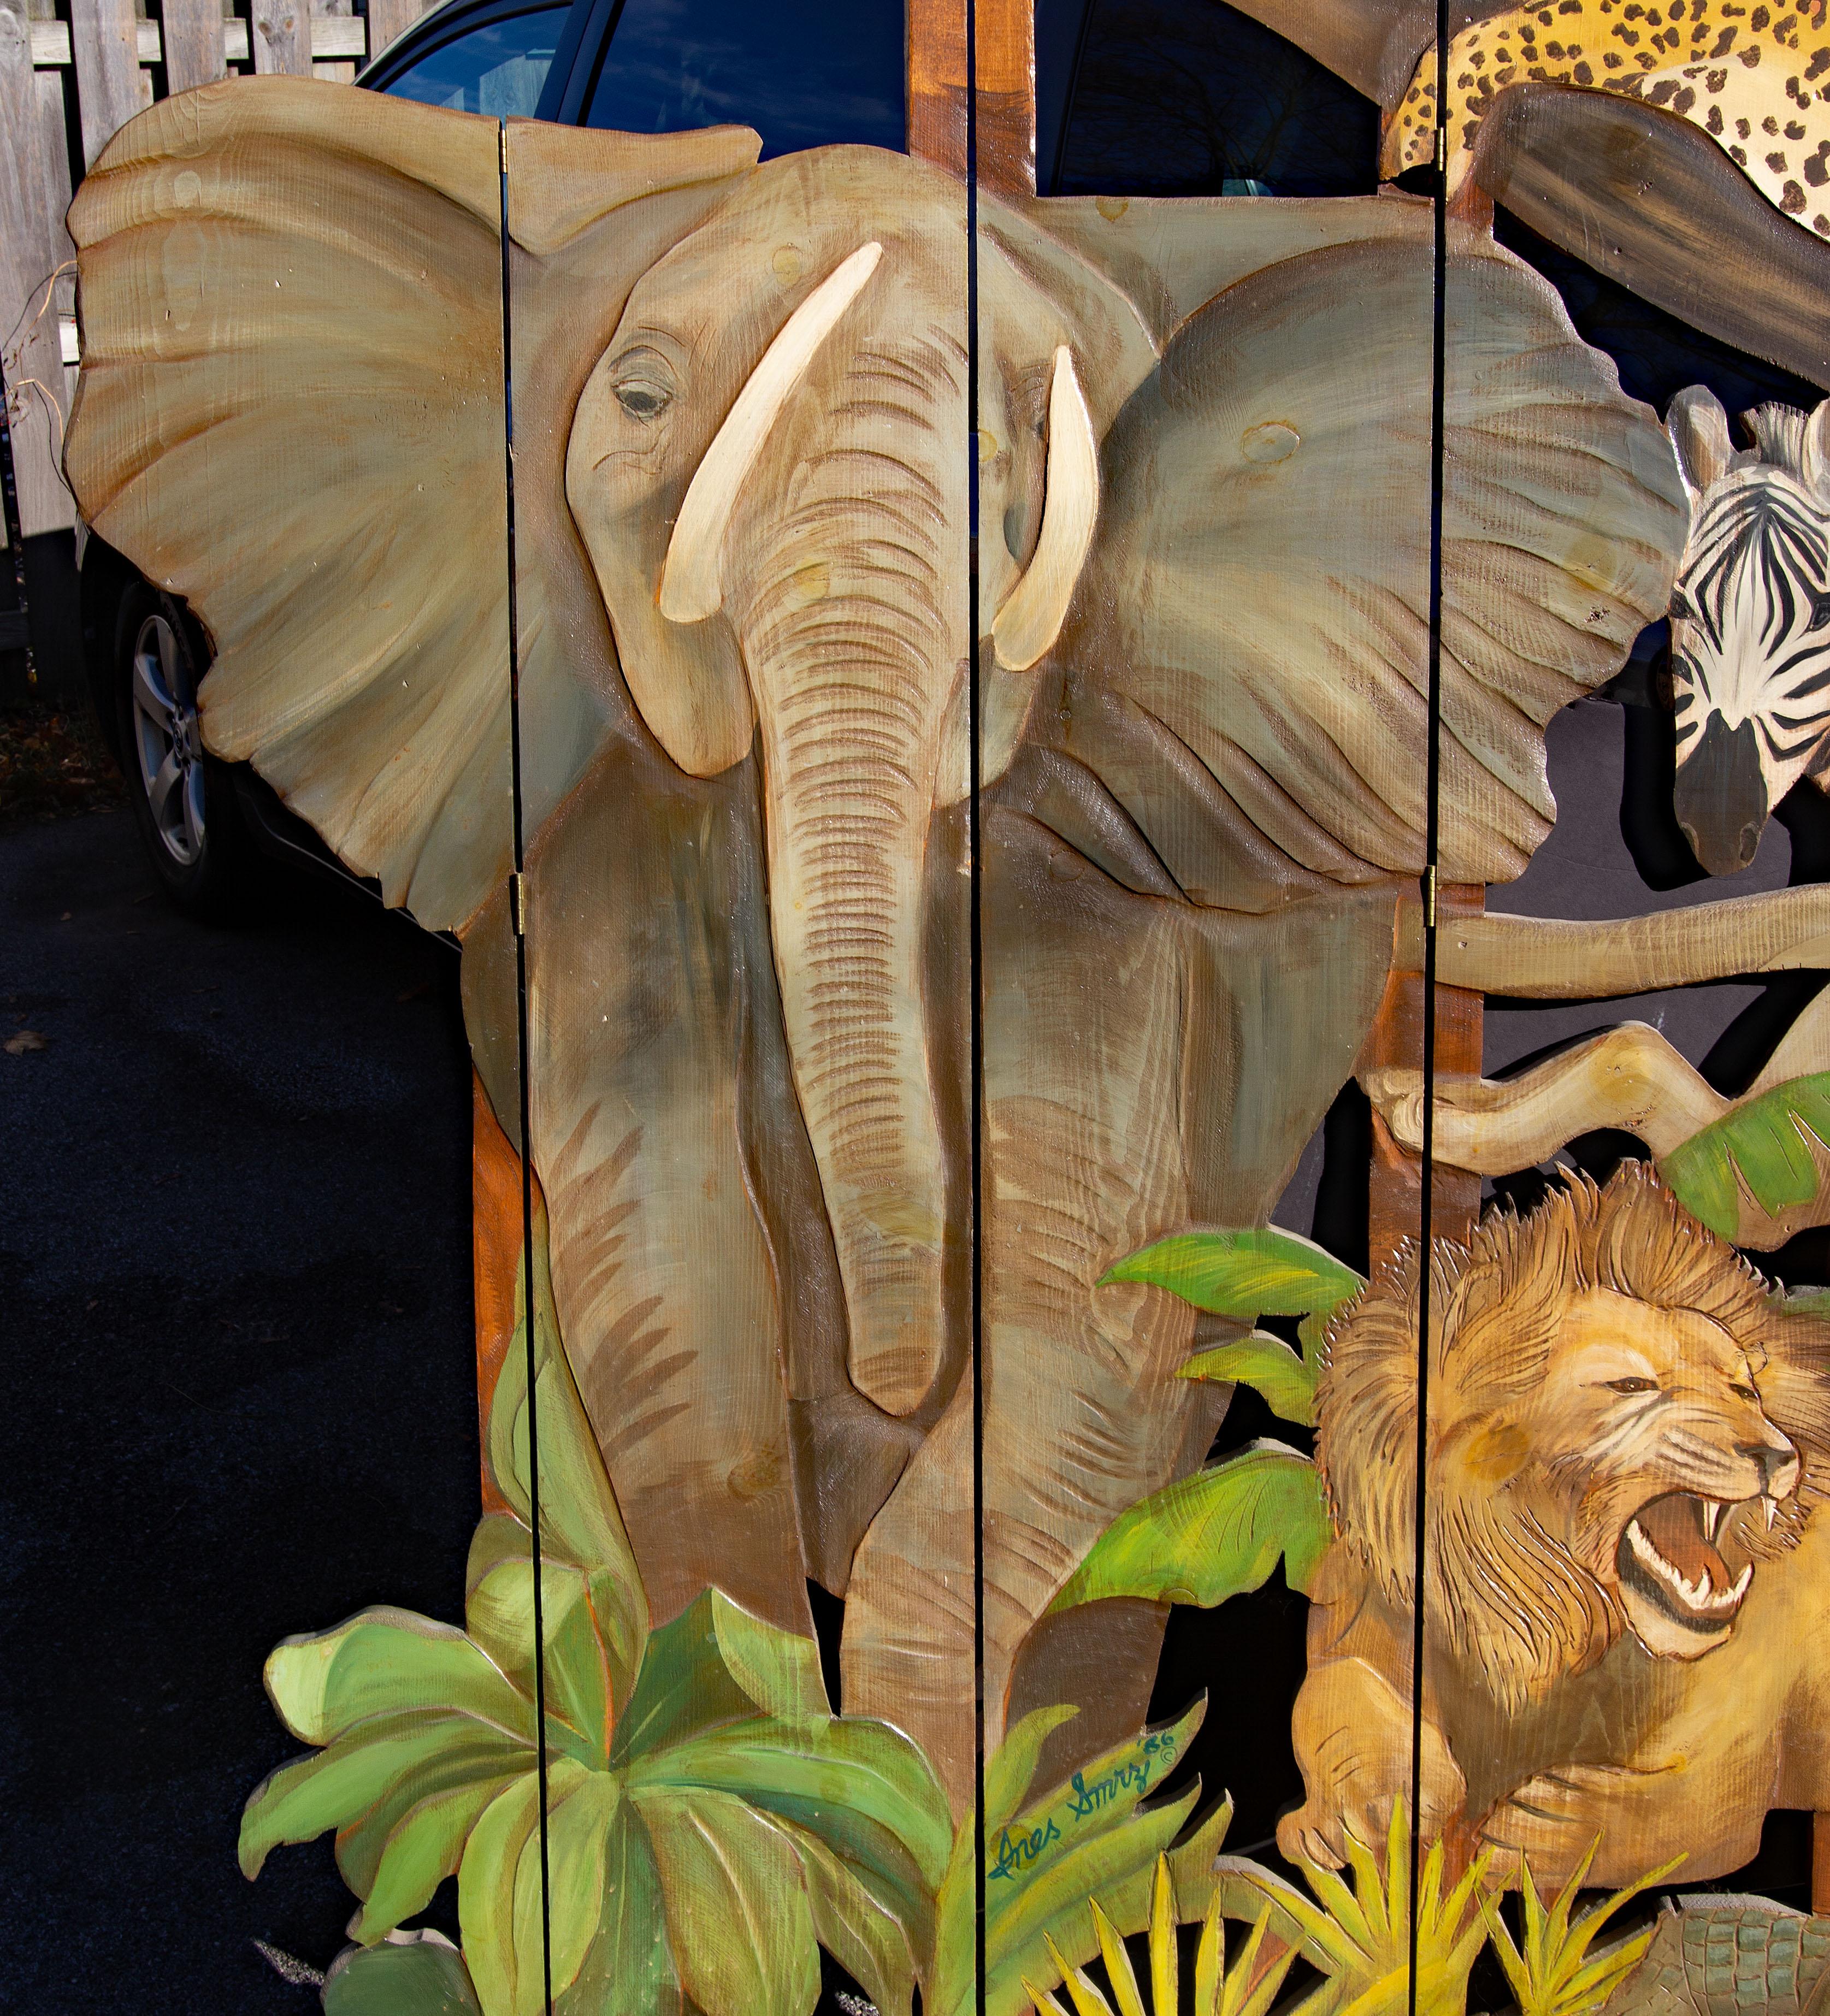 Exotic African jungle screen. Hand painted and carved solid wood panels. Signed Ines Smrz. Dated 1986. Shipping as low as $350. Contact Joseph Dasta Antiques for a quote.